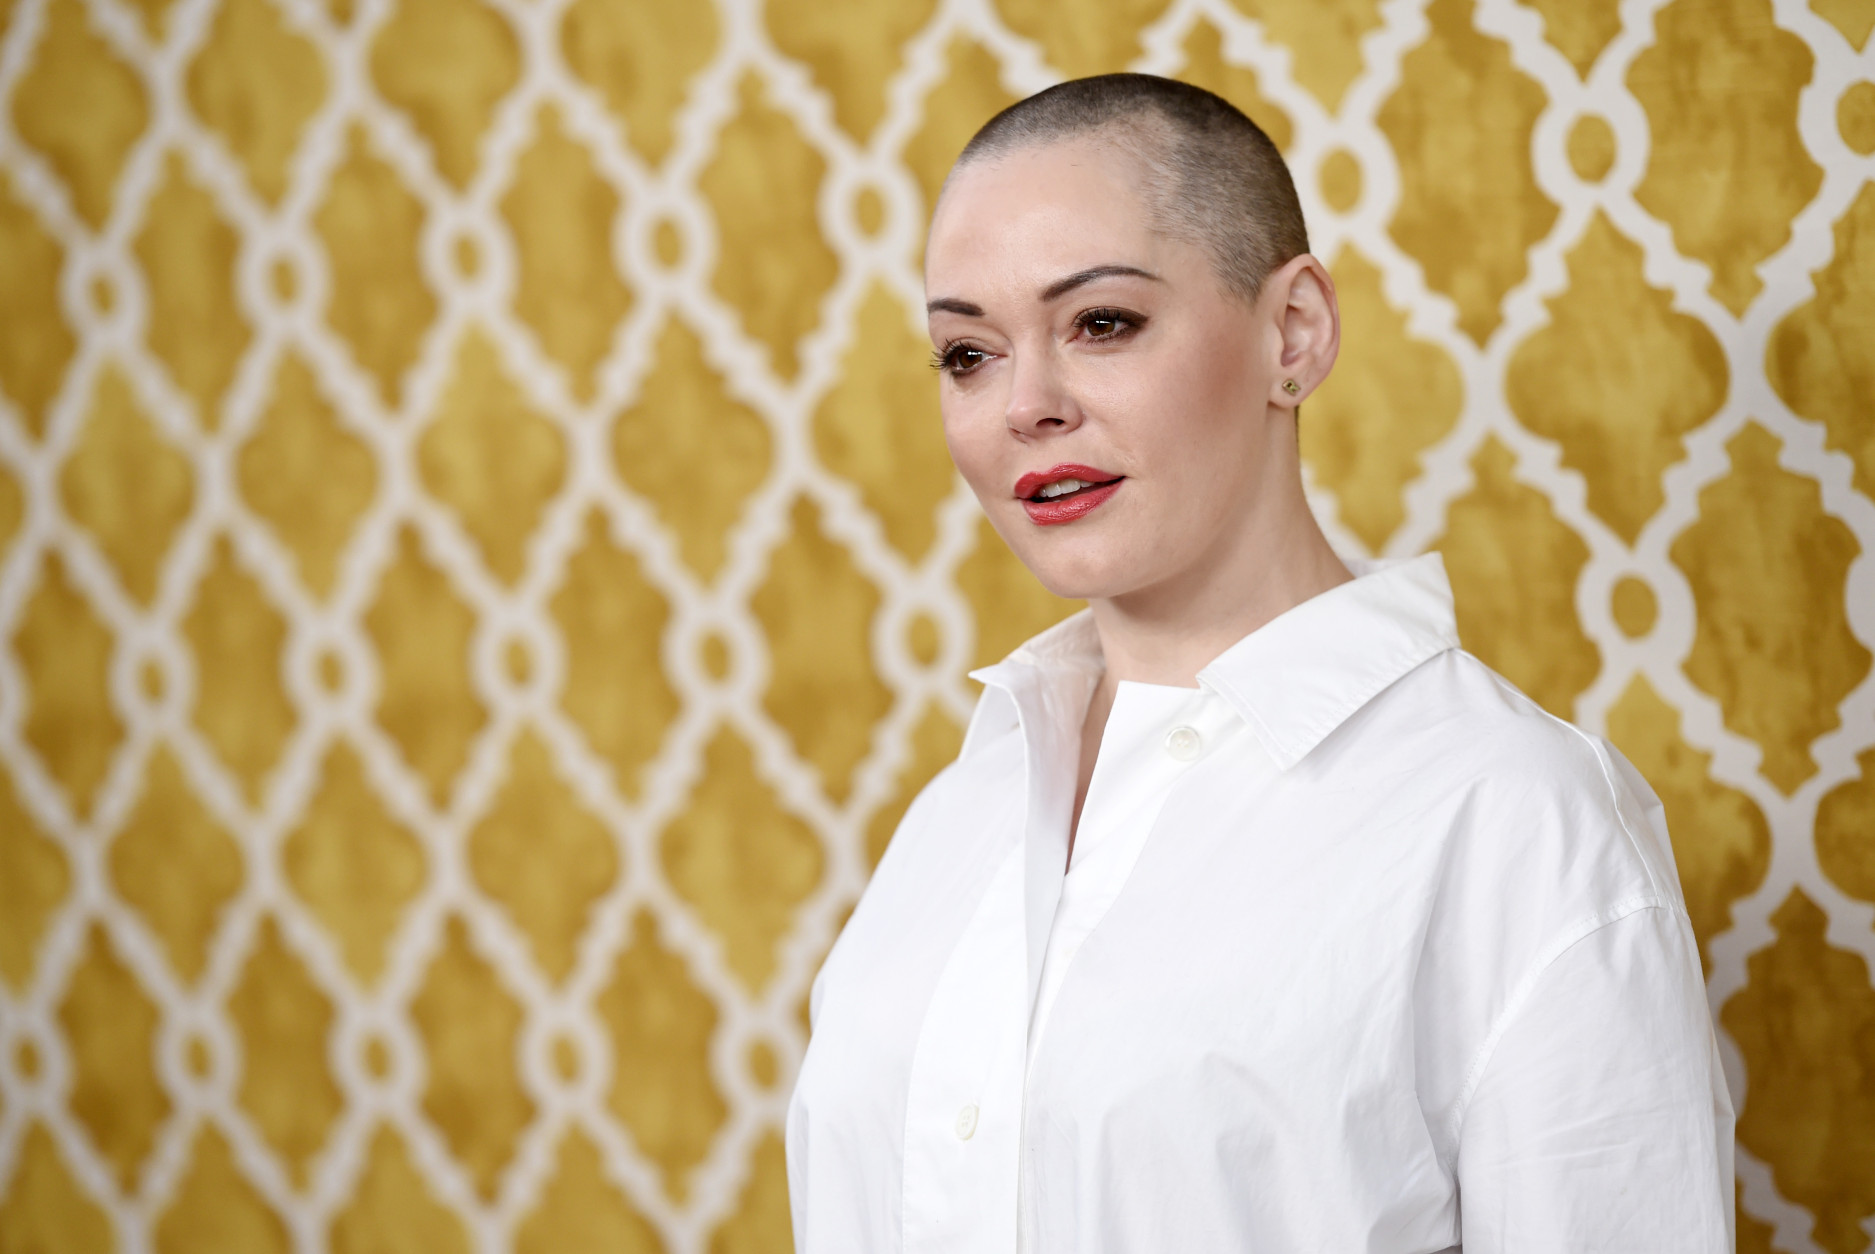 Actress Rose McGowan poses at the premiere of the HBO film at Paramount Studios on Thursday, March 31, 2016, in Los Angeles. (Photo by Chris Pizzello/Invision/AP)